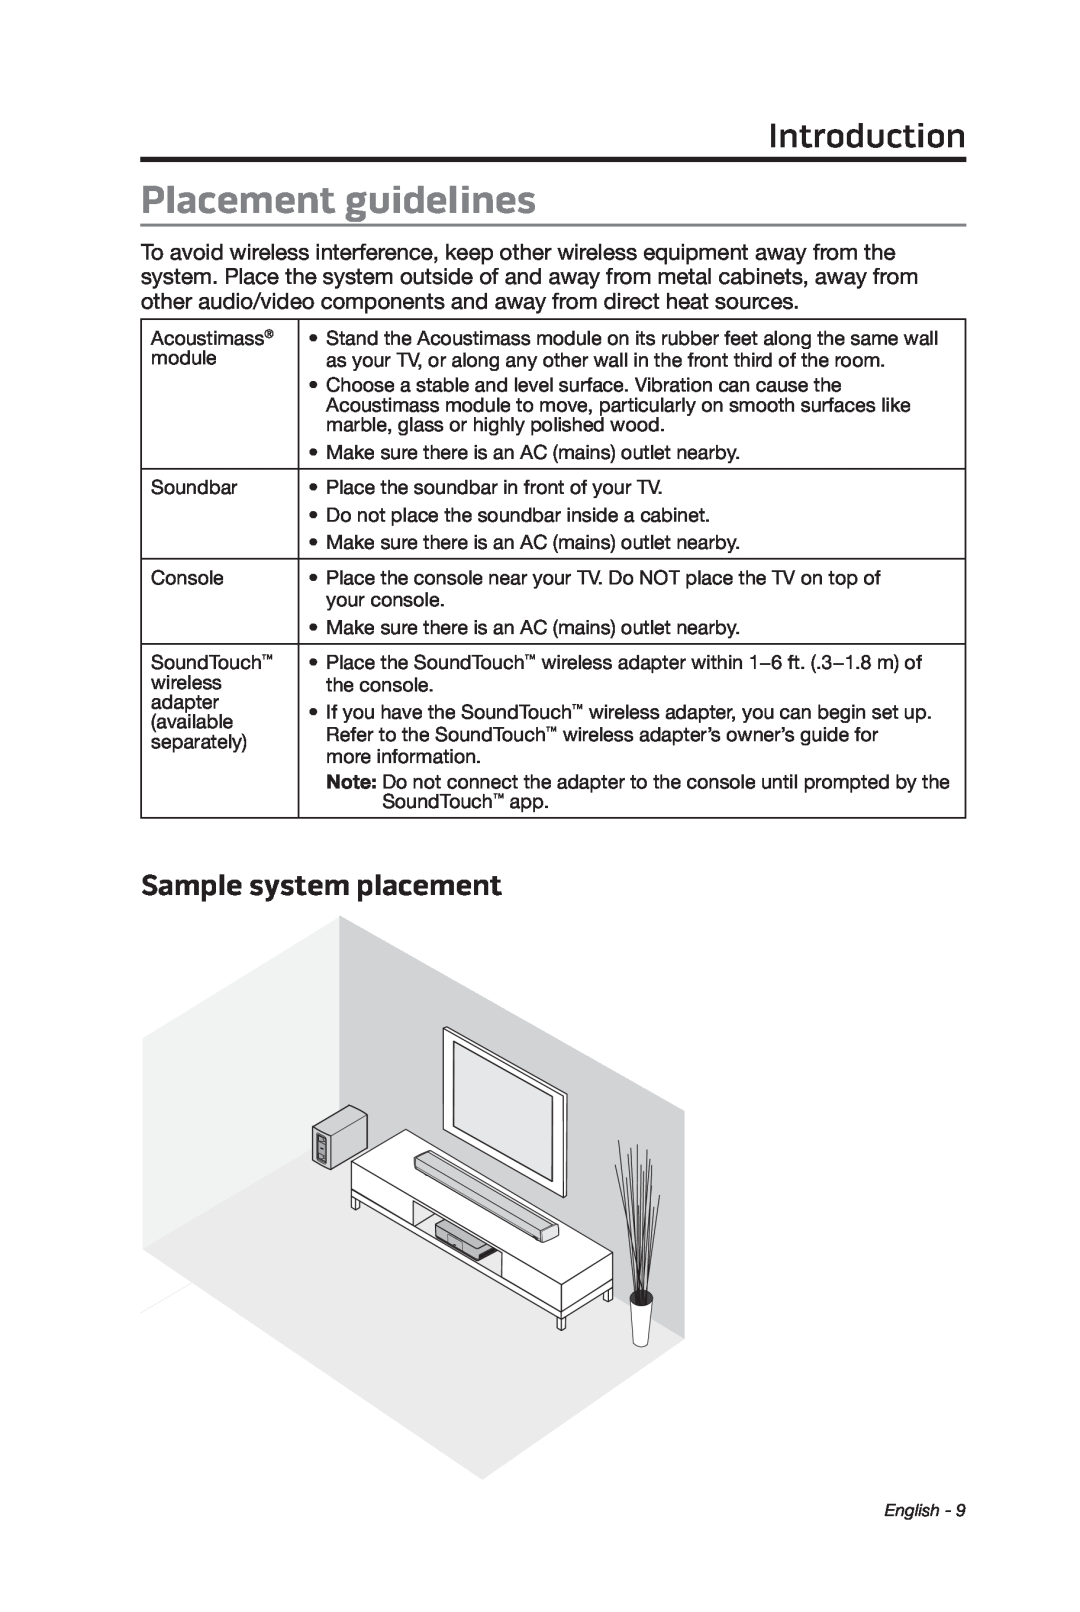 Bose cinemate manual Placement guidelines, Sample system placement, Introduction 